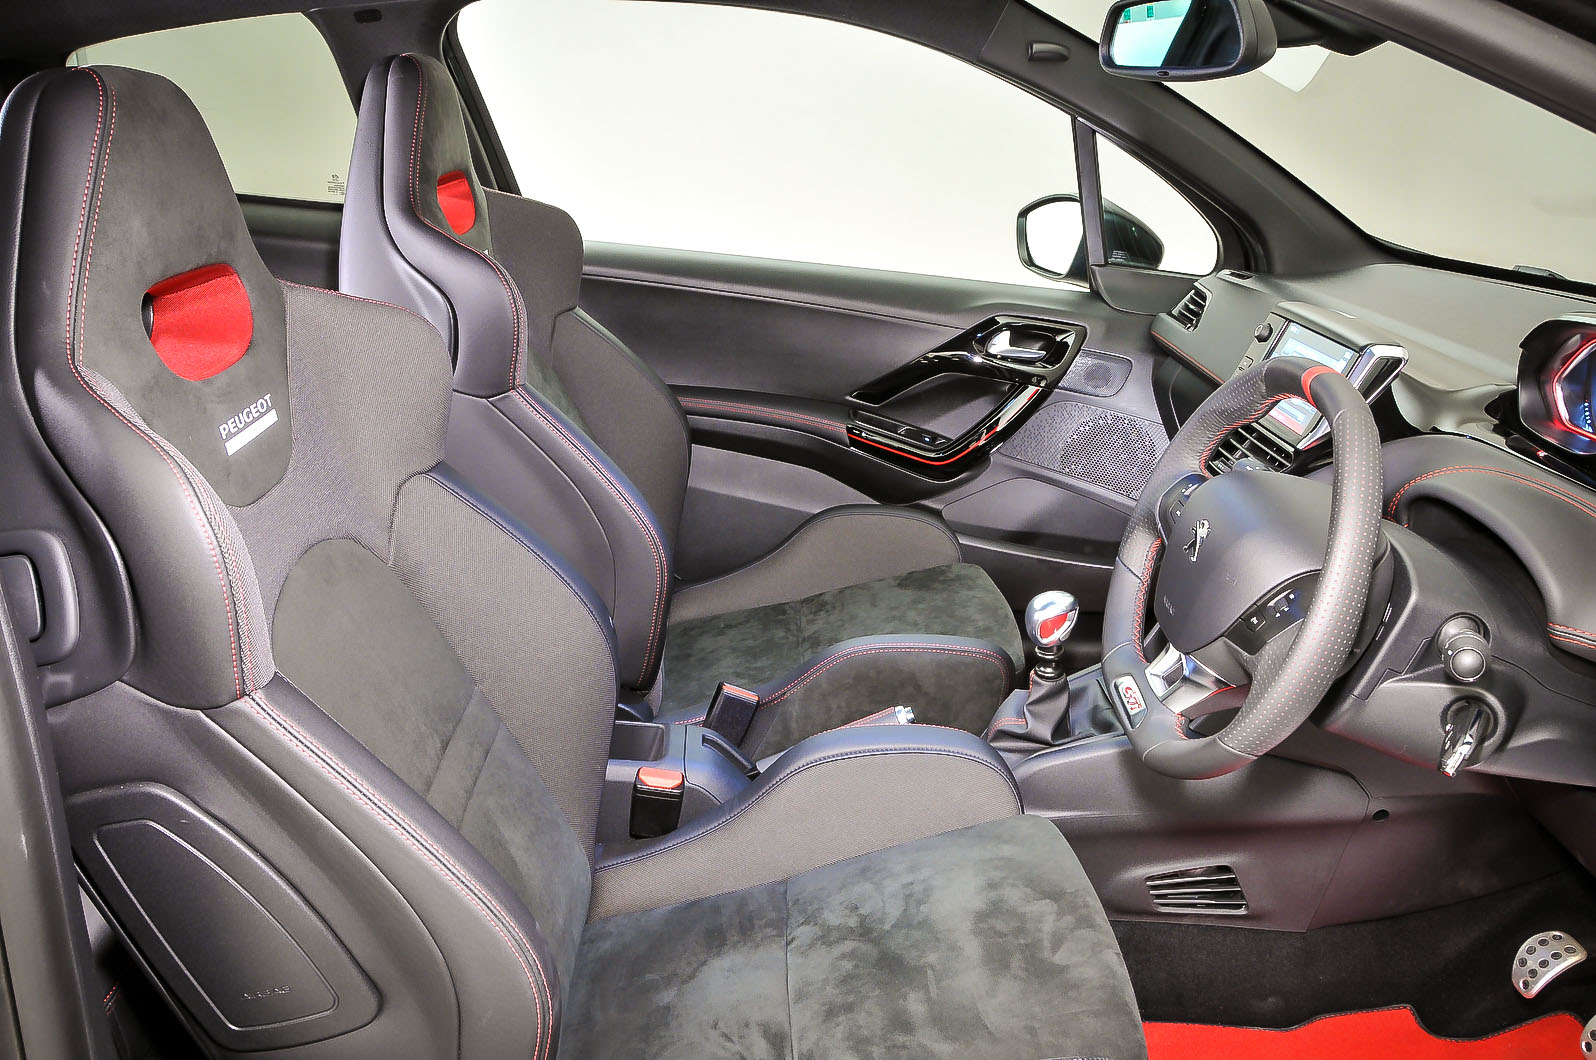 stack let down Pure Peugeot 208 GTi 30th 2014-2015 interior | Autocar